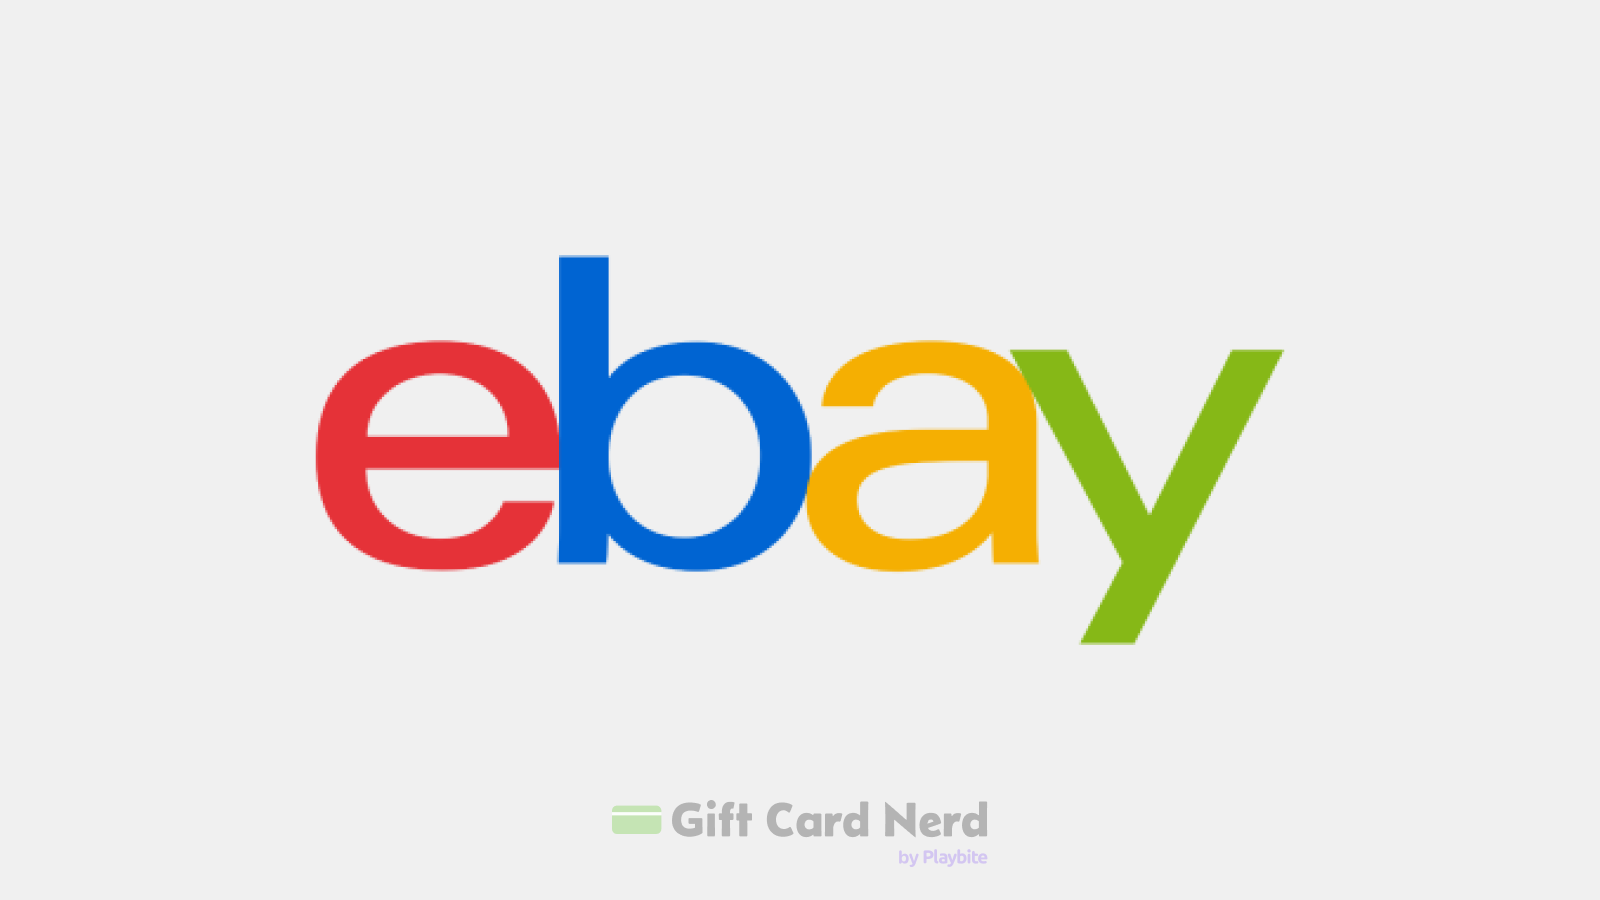 Does Target Sell eBay Gift Cards?